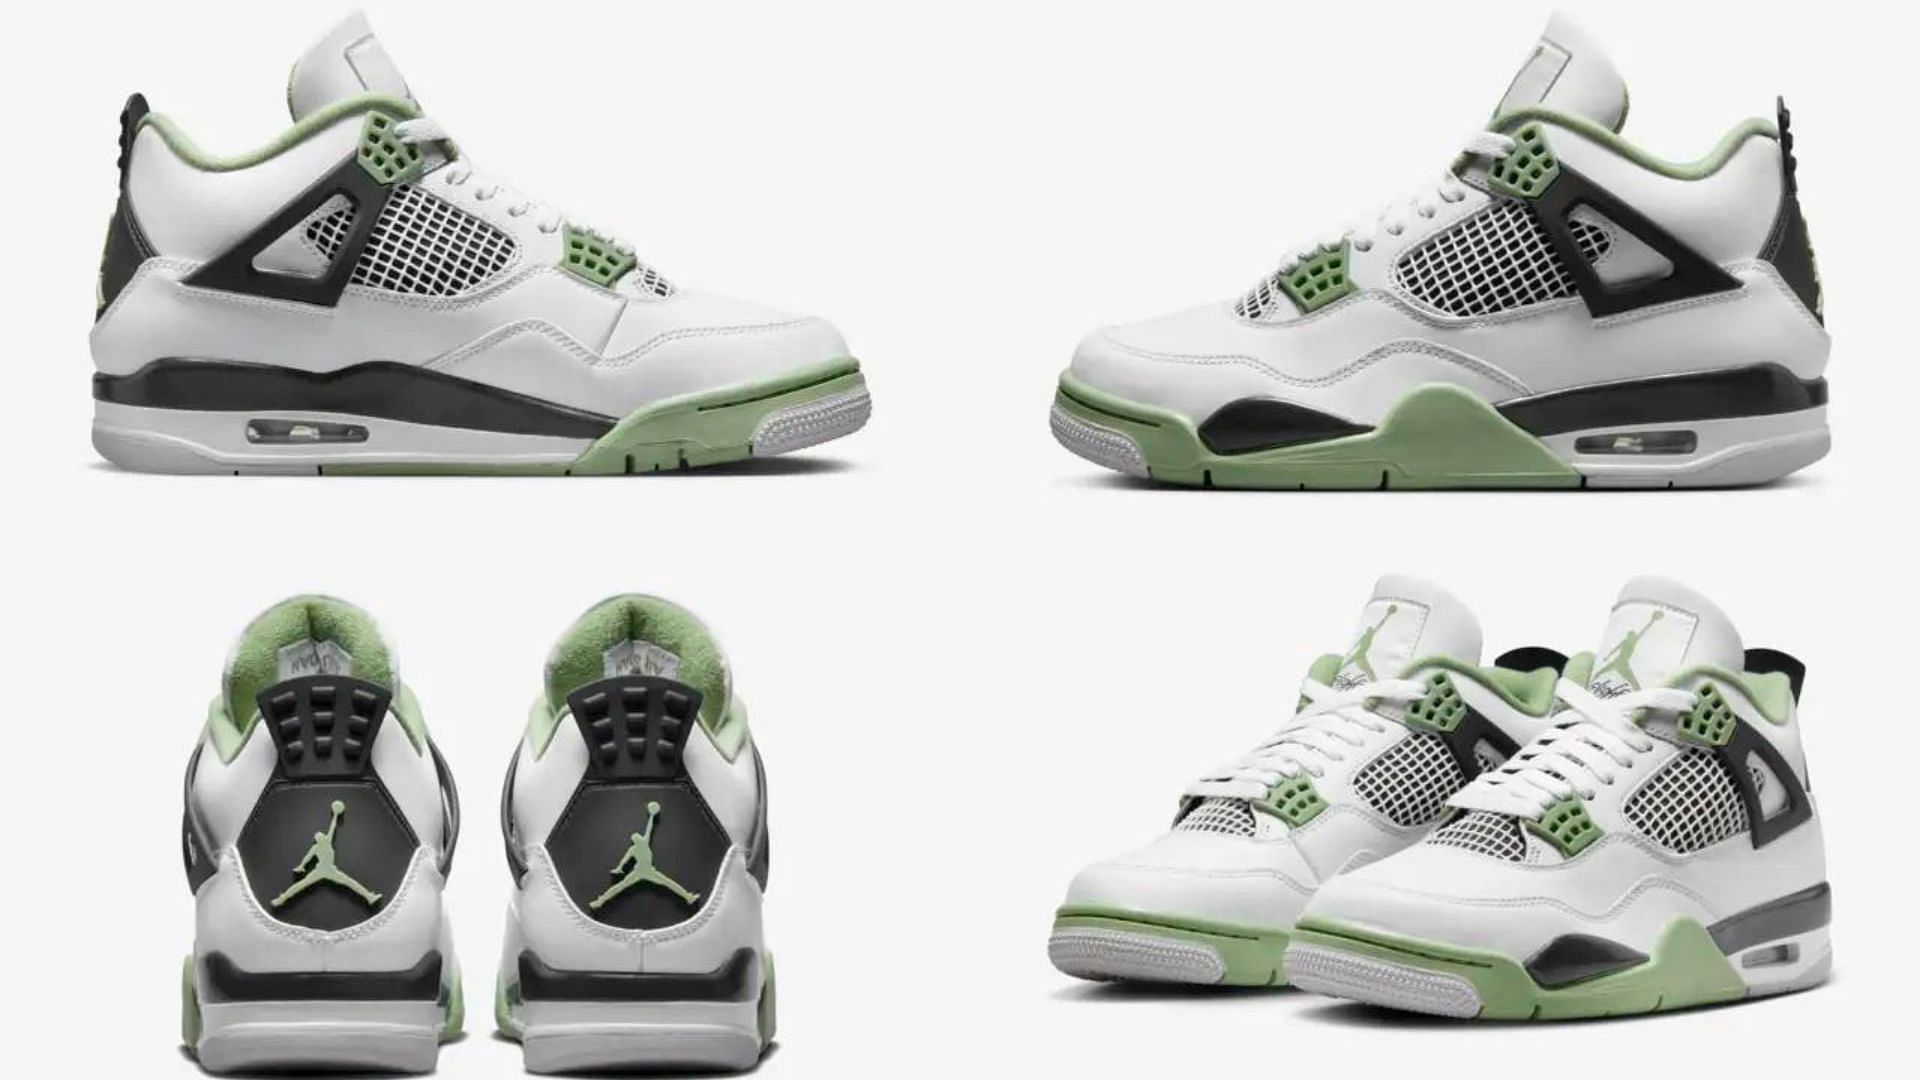 The upcoming Nike Air Jordan 4 &quot;Oil Green&quot; sneakers will be released exclusively in women&#039;s sizes (Image via Sportskeeda)